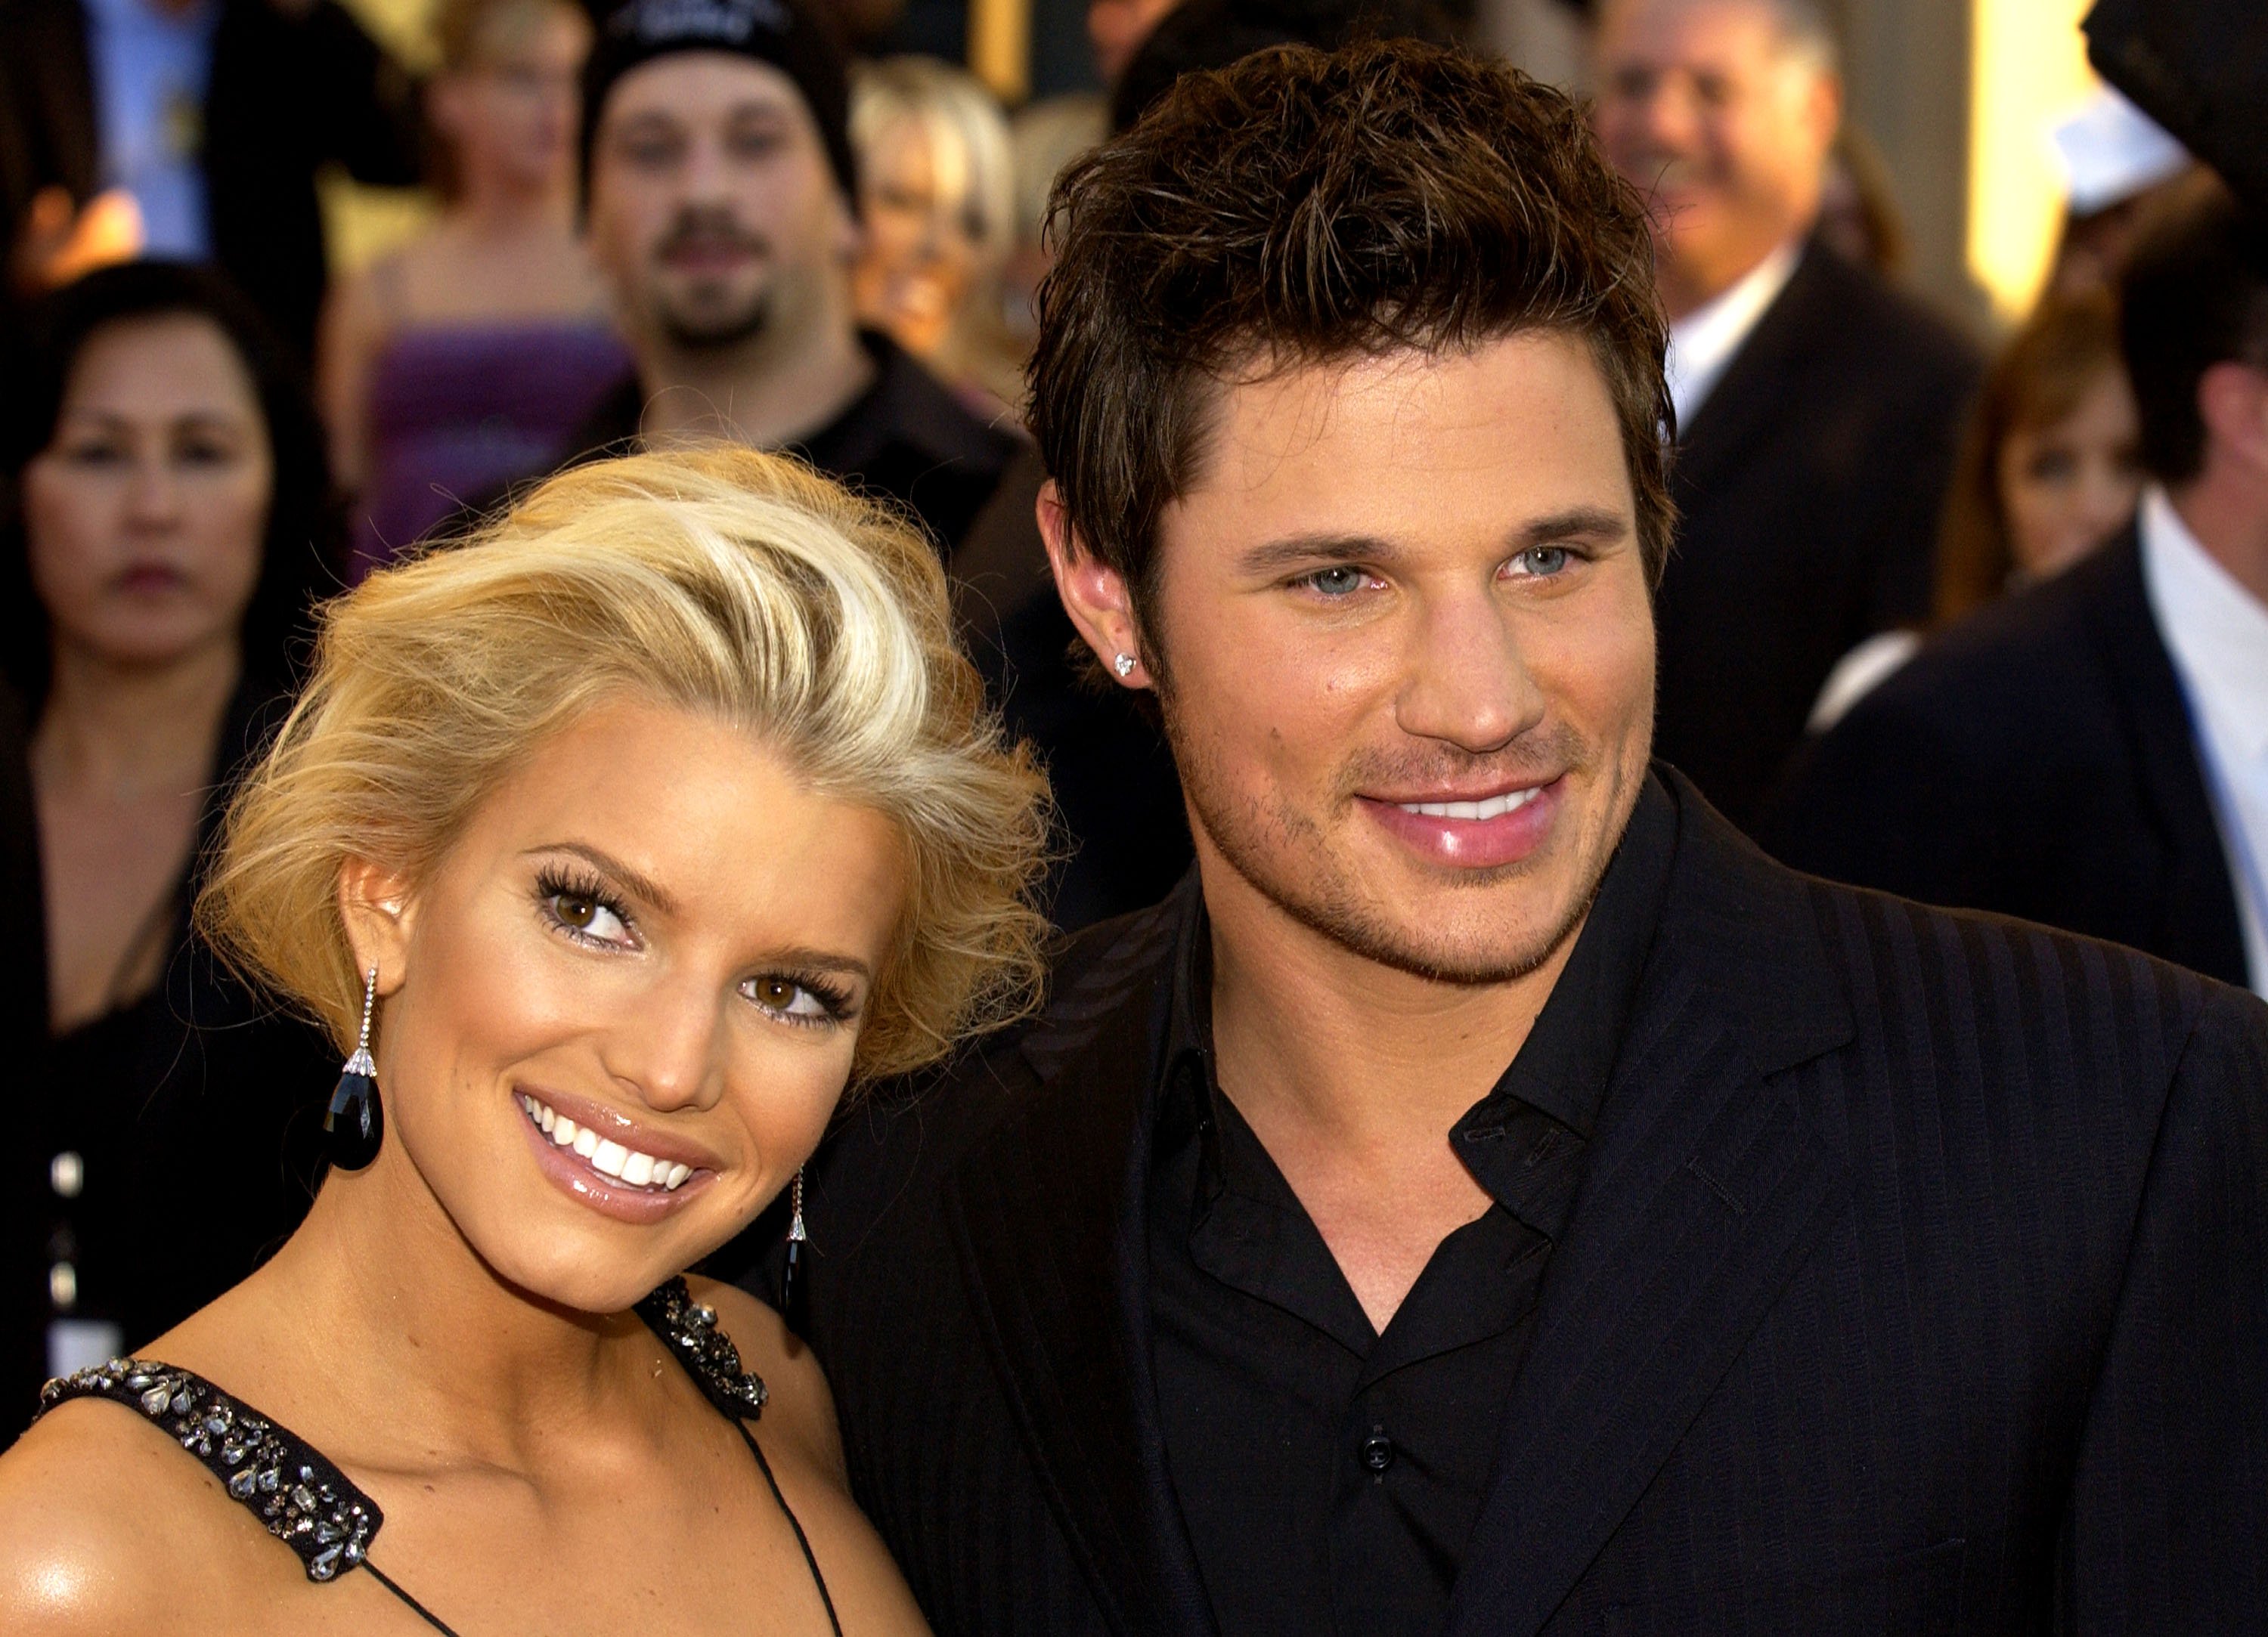 Jessica Simpson (left) and husband Nick Lachey arrive at the 32nd Annual "American Music Awards" on November 14, 2004, at the Shrine Auditorium, in Los Angeles, California. | Source: Getty Images.